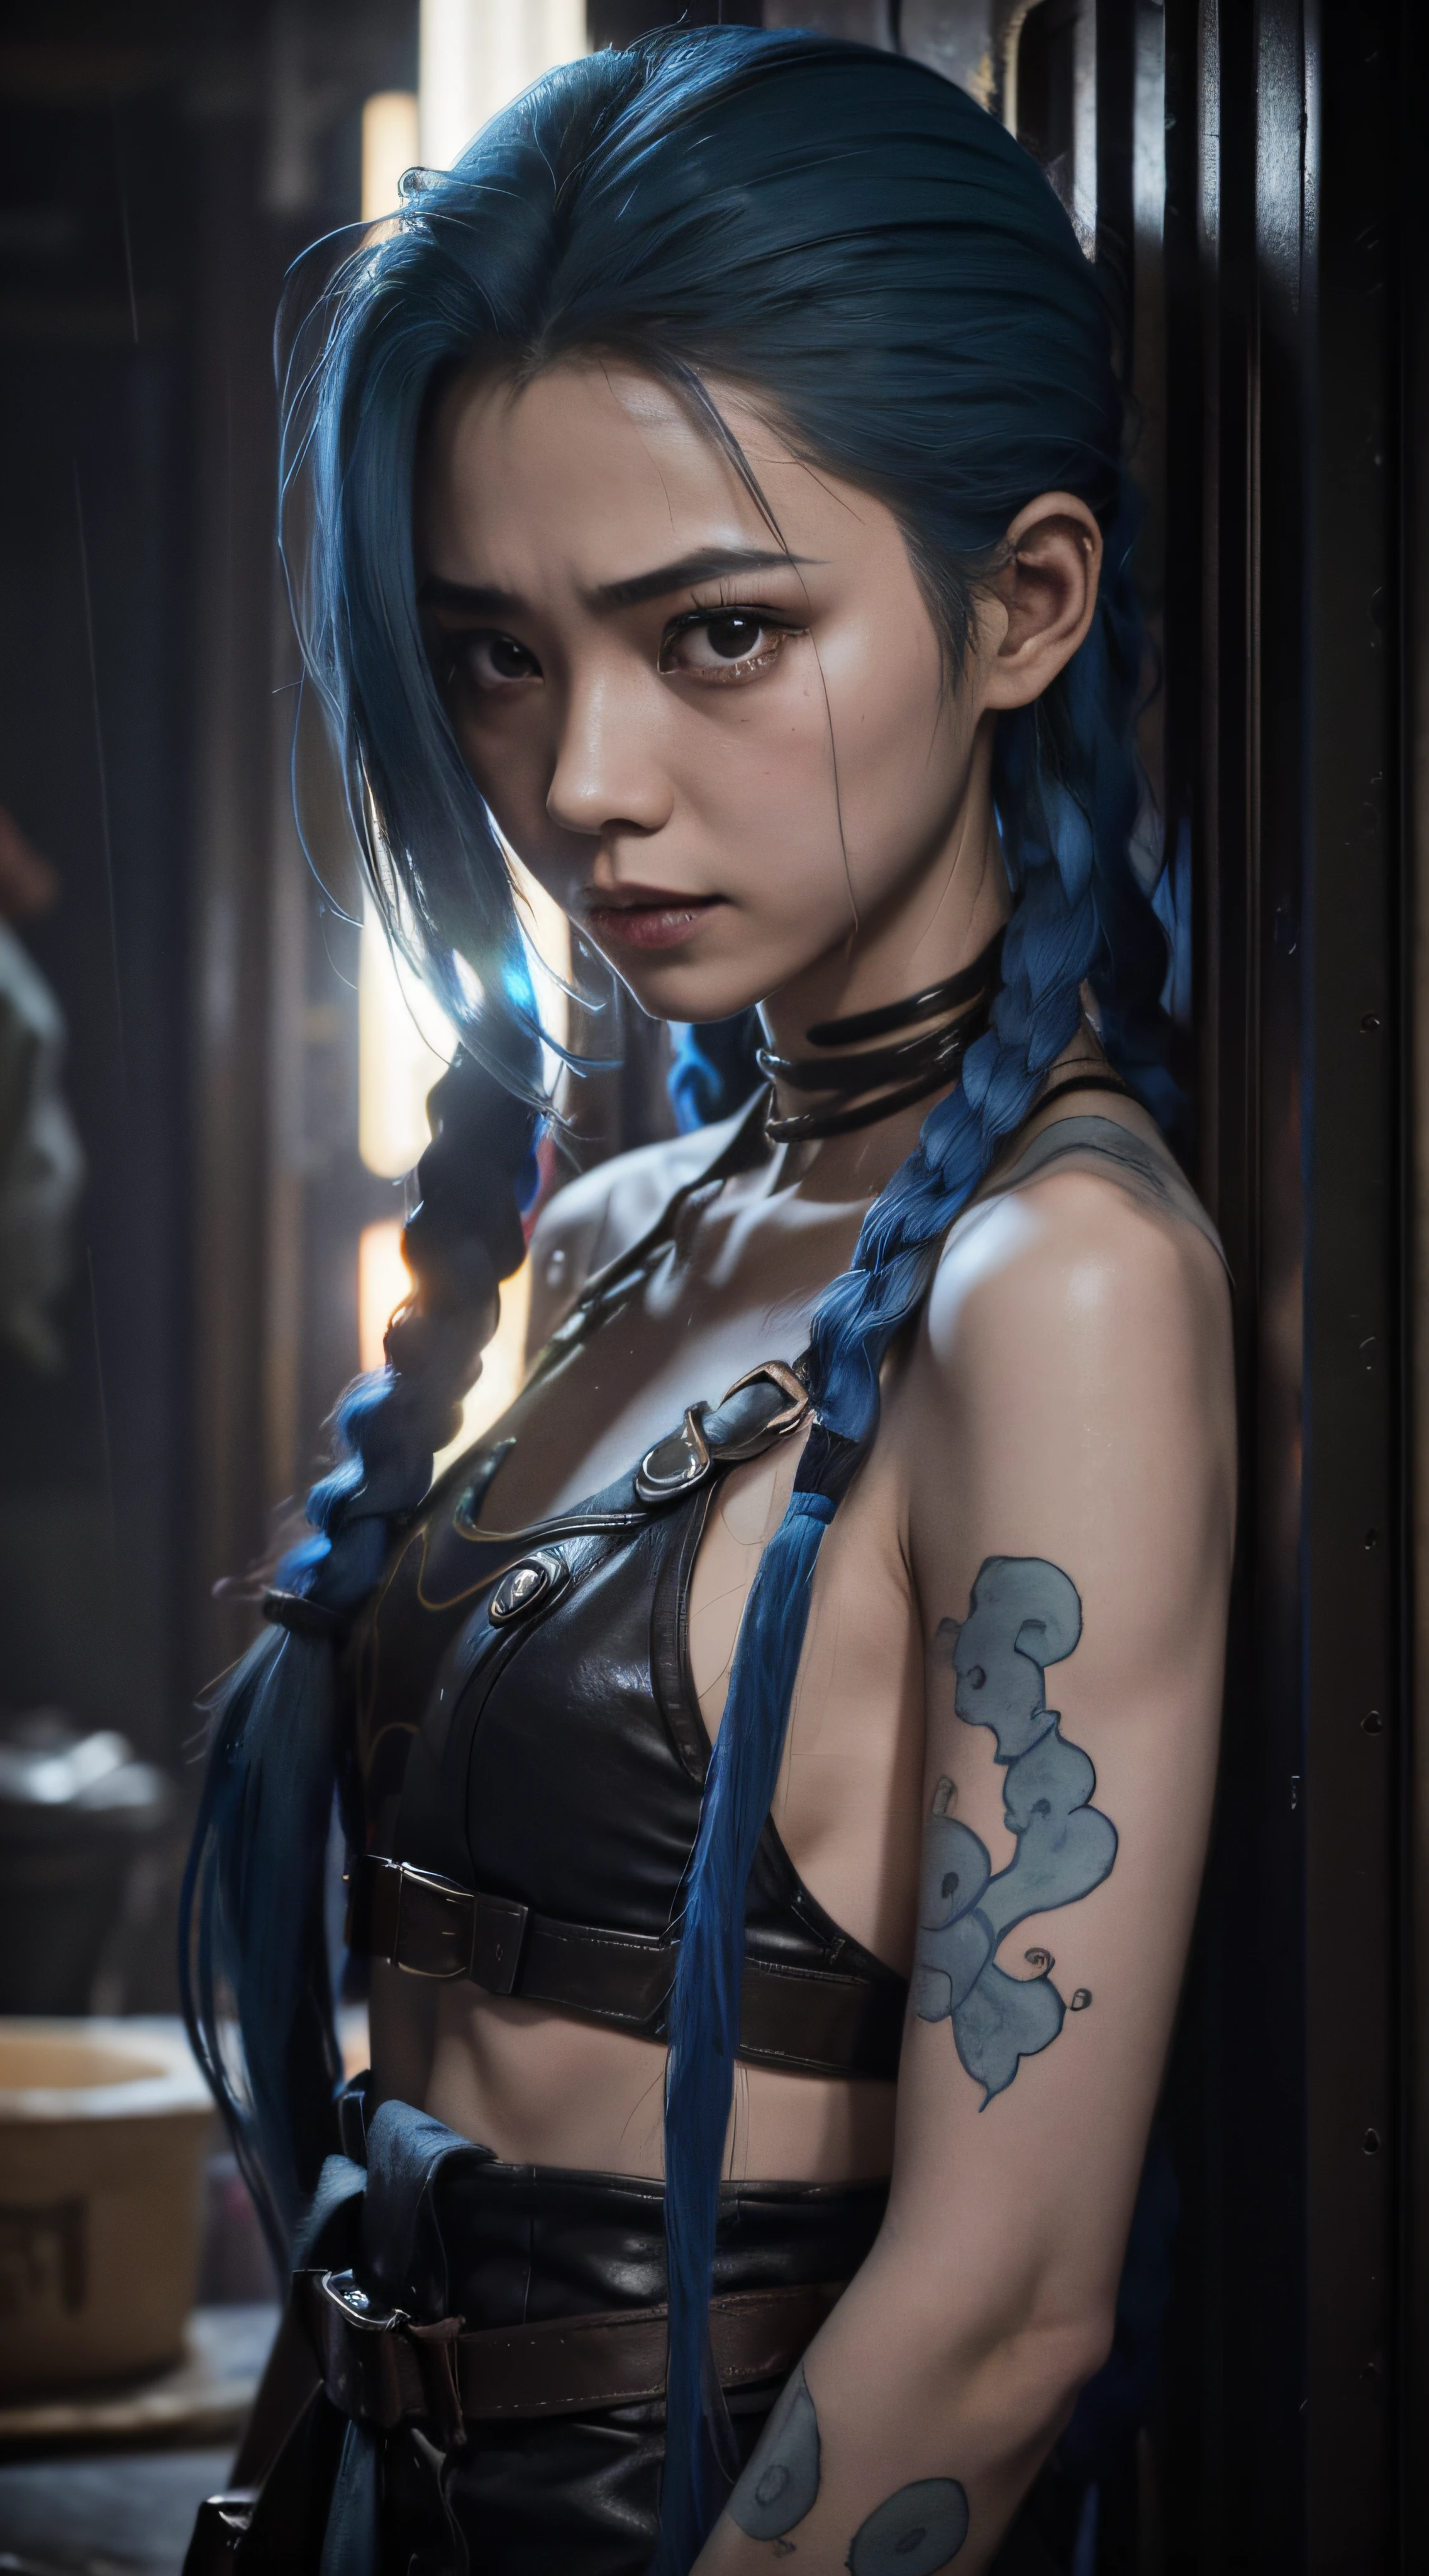 Jinx，Jinx blue hair，（cinematic tones）（The film uses cool colors of blue and gray）（Wet clothes：1.9）,（Get wet all over your body：1.9）,Top image quality, tmasterpiece, Ultra-high resolution, （Fidelity：1.4）, stunningly beautiful woman, （Deeply condolences）, , dim murky lights, shadowy, Desperate, Pity, Pathetic, cinematic, Tears, tear drop, , Real rain, wetting hair,. Surprising crying, Clear white skin,  There are scratches everywhere, Dirty face,  White skin,  Smooth skin, Surprisingly realistic pictures, 8K high quality medium dark illumination, High detail, Detail Eye, Detail Make,